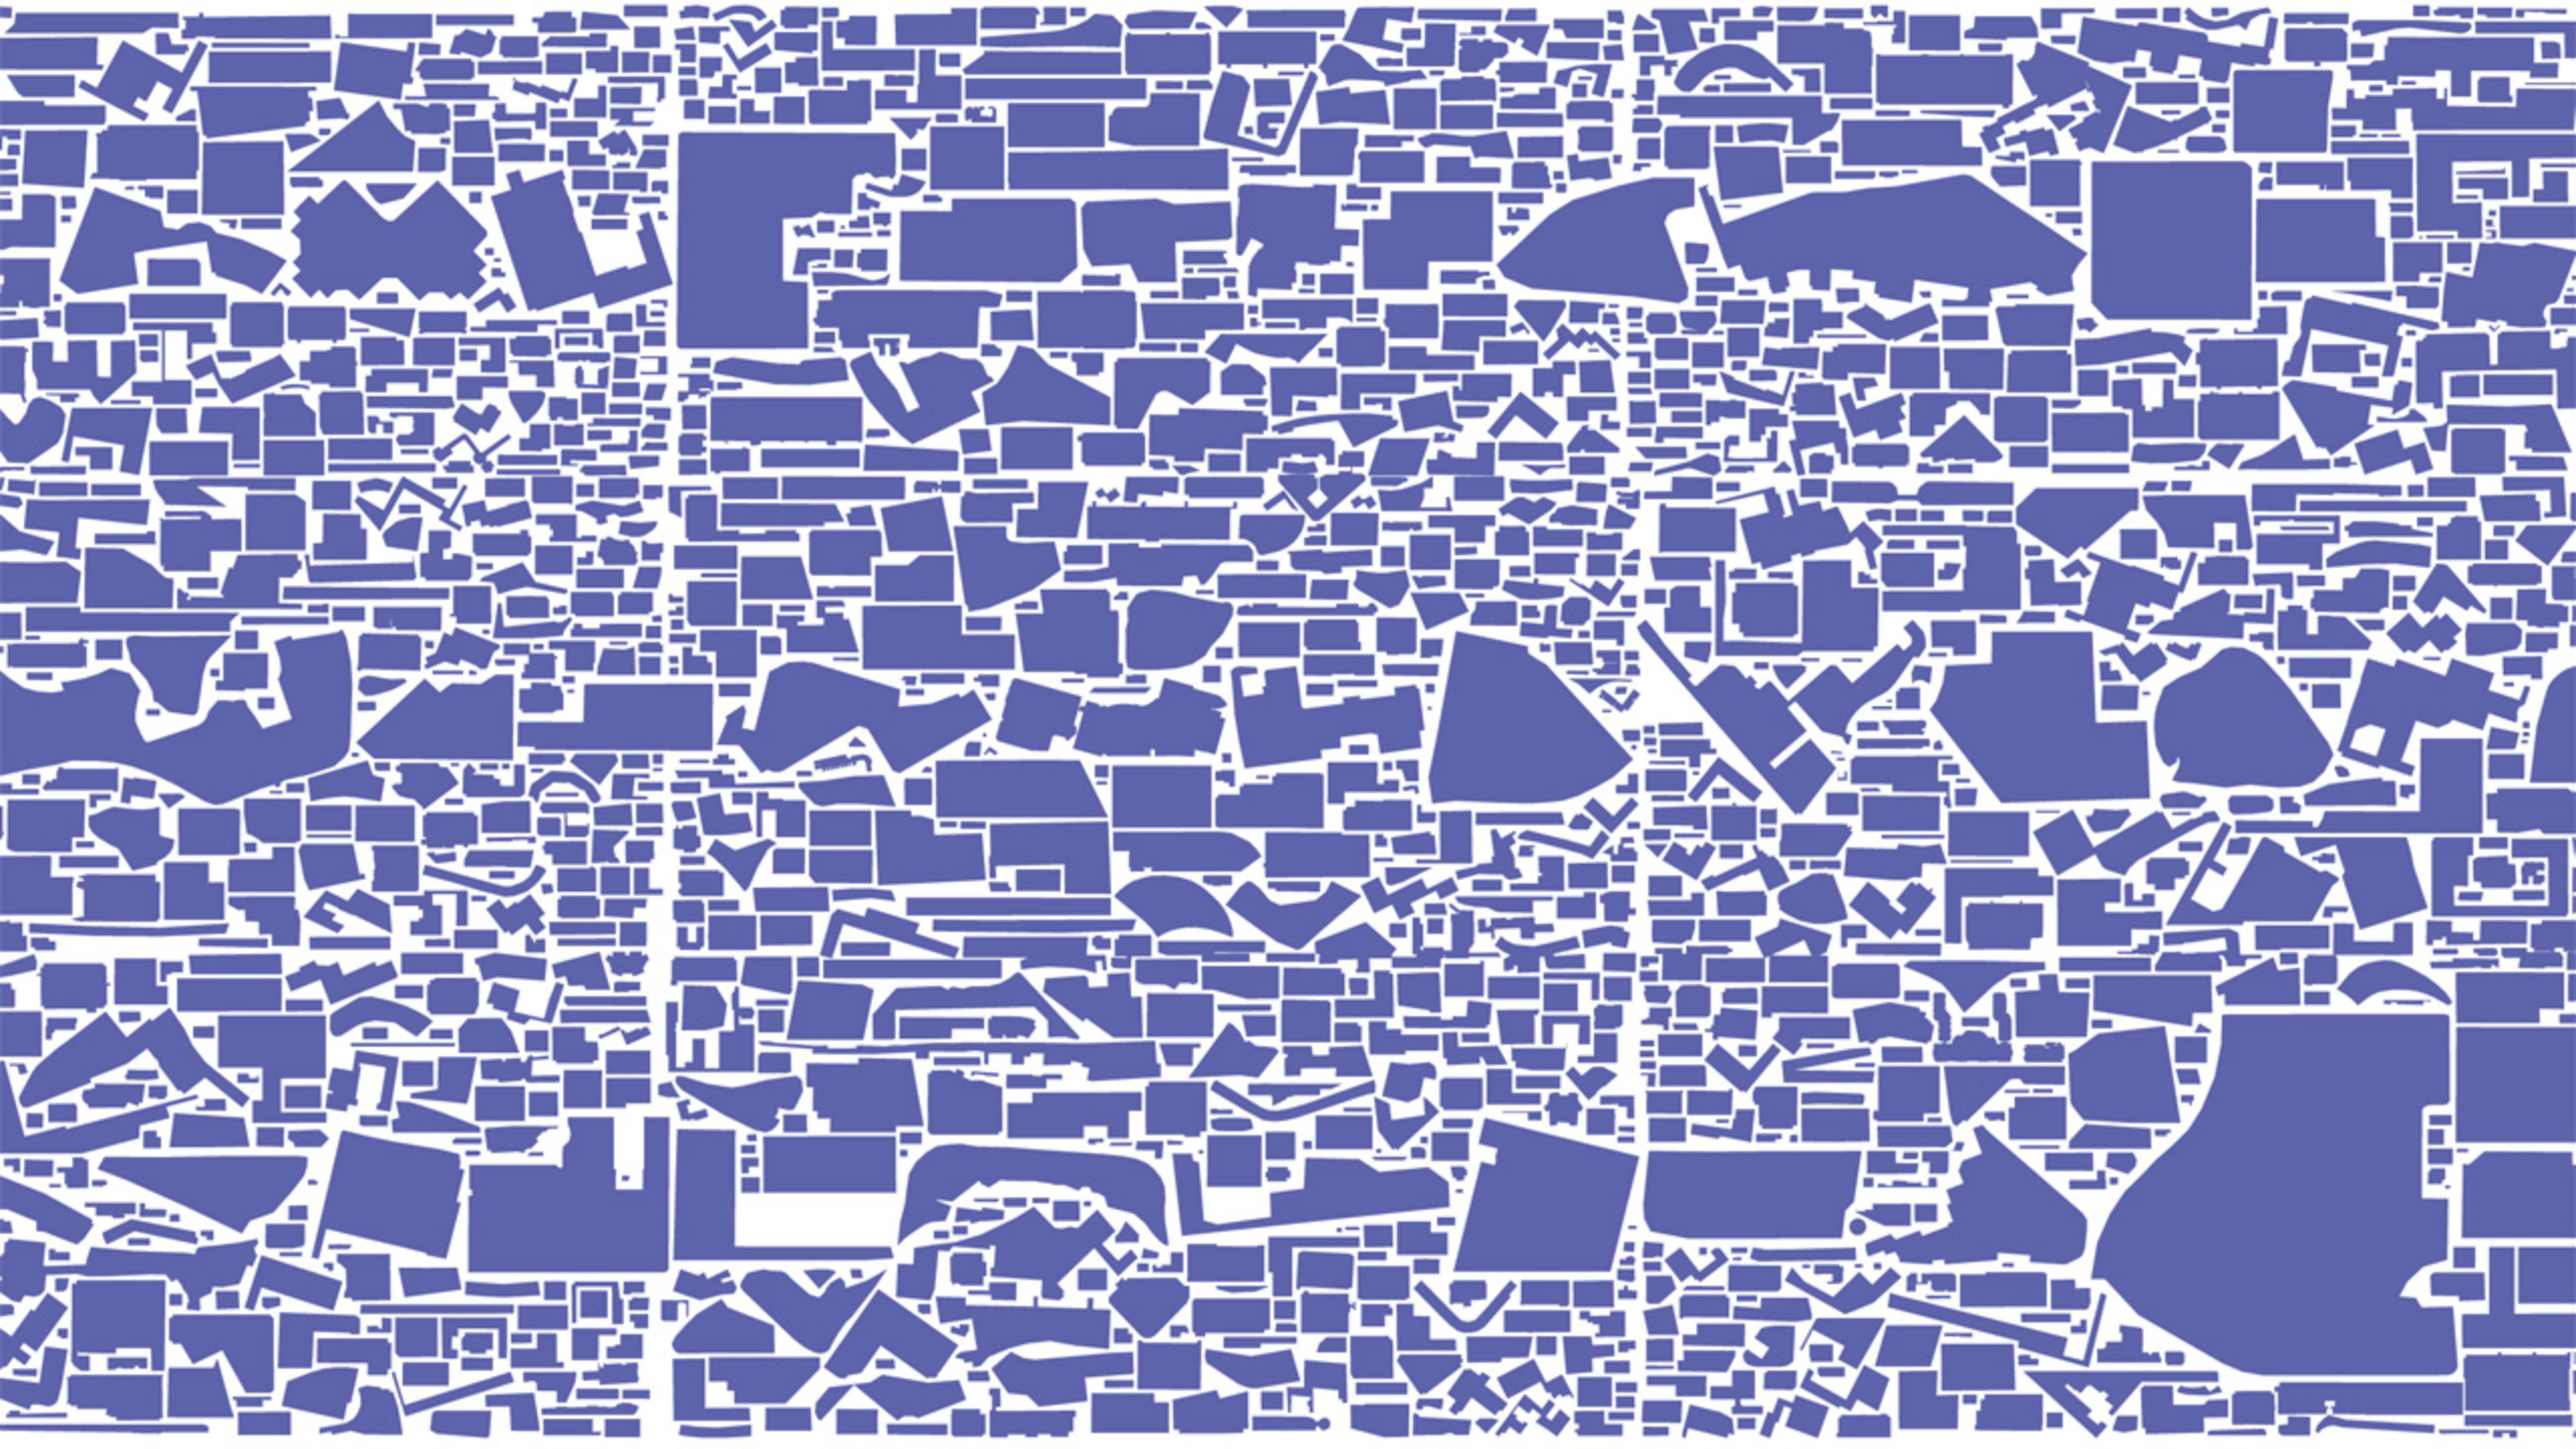 See Just How Much Of A City’s Land Is Used For Parking Spaces